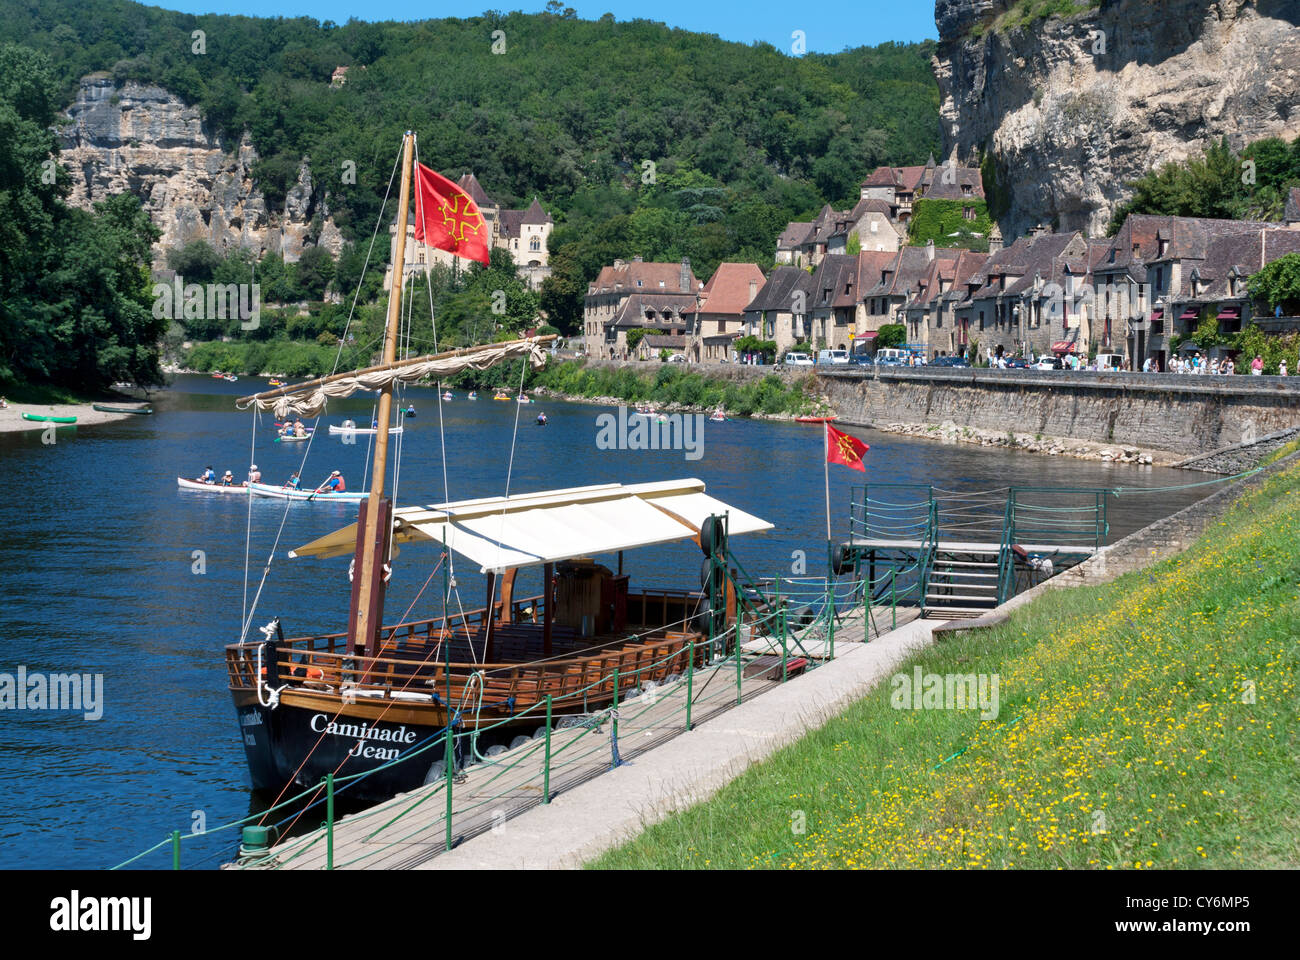 A gabare (Dordogne river boat)  and canoes on the Dordogne at La Roque Gageac, Perigord, France Stock Photo